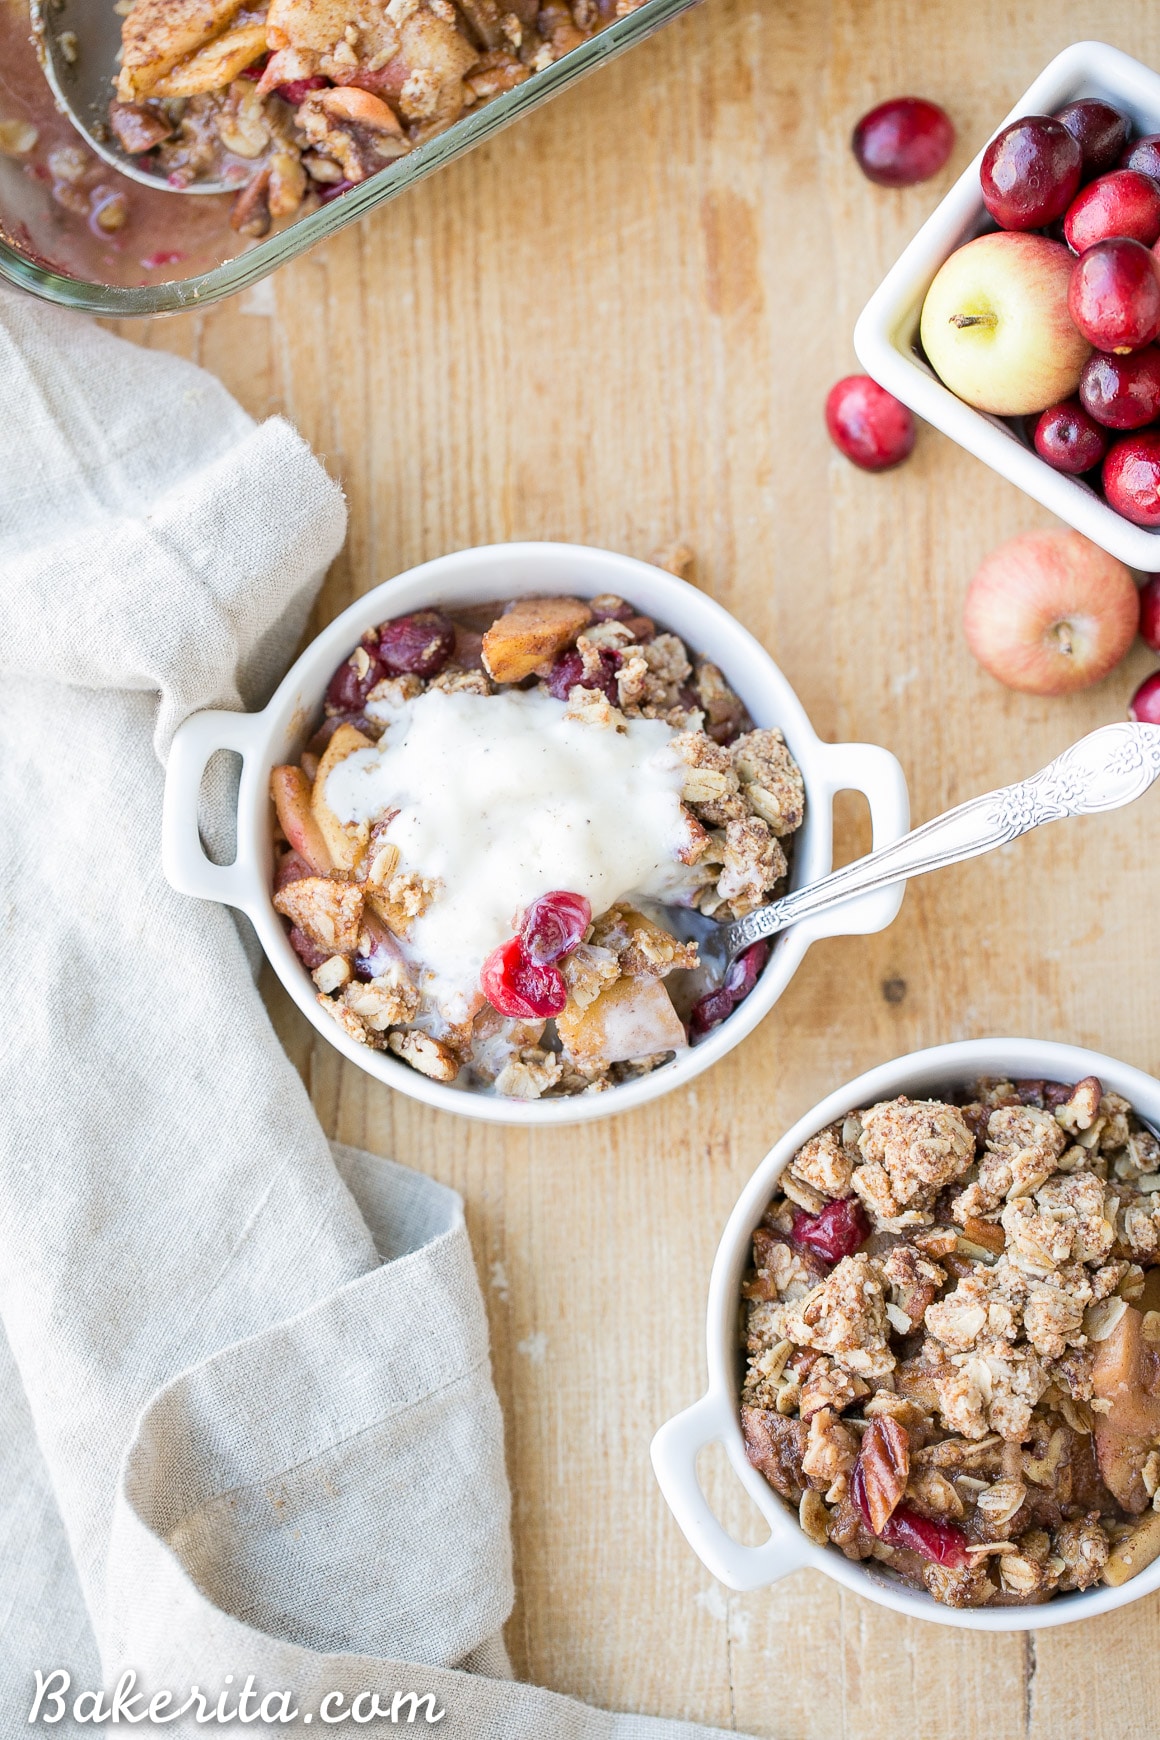 This Cranberry Apple Crisp is spiced with cinnamon, nutmeg & orange zest and topped with a crunchy pecan oatmeal crisp topping. This gluten-free and vegan crisp is the perfect holiday dessert!